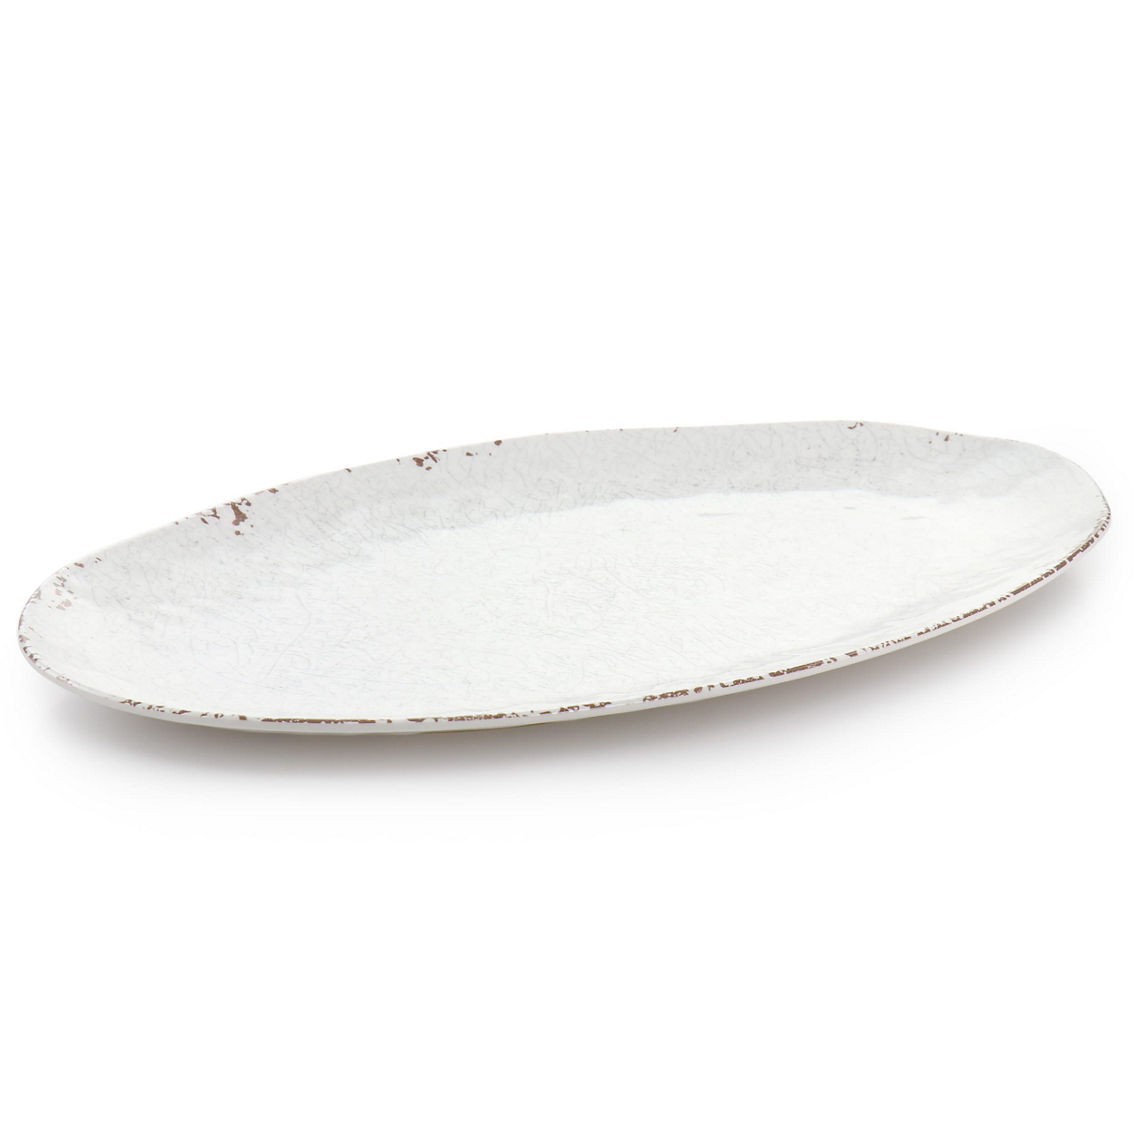 Laurie Gates Mauna 2 Piece Melamine Serving Tray Set in White - Image 3 of 5